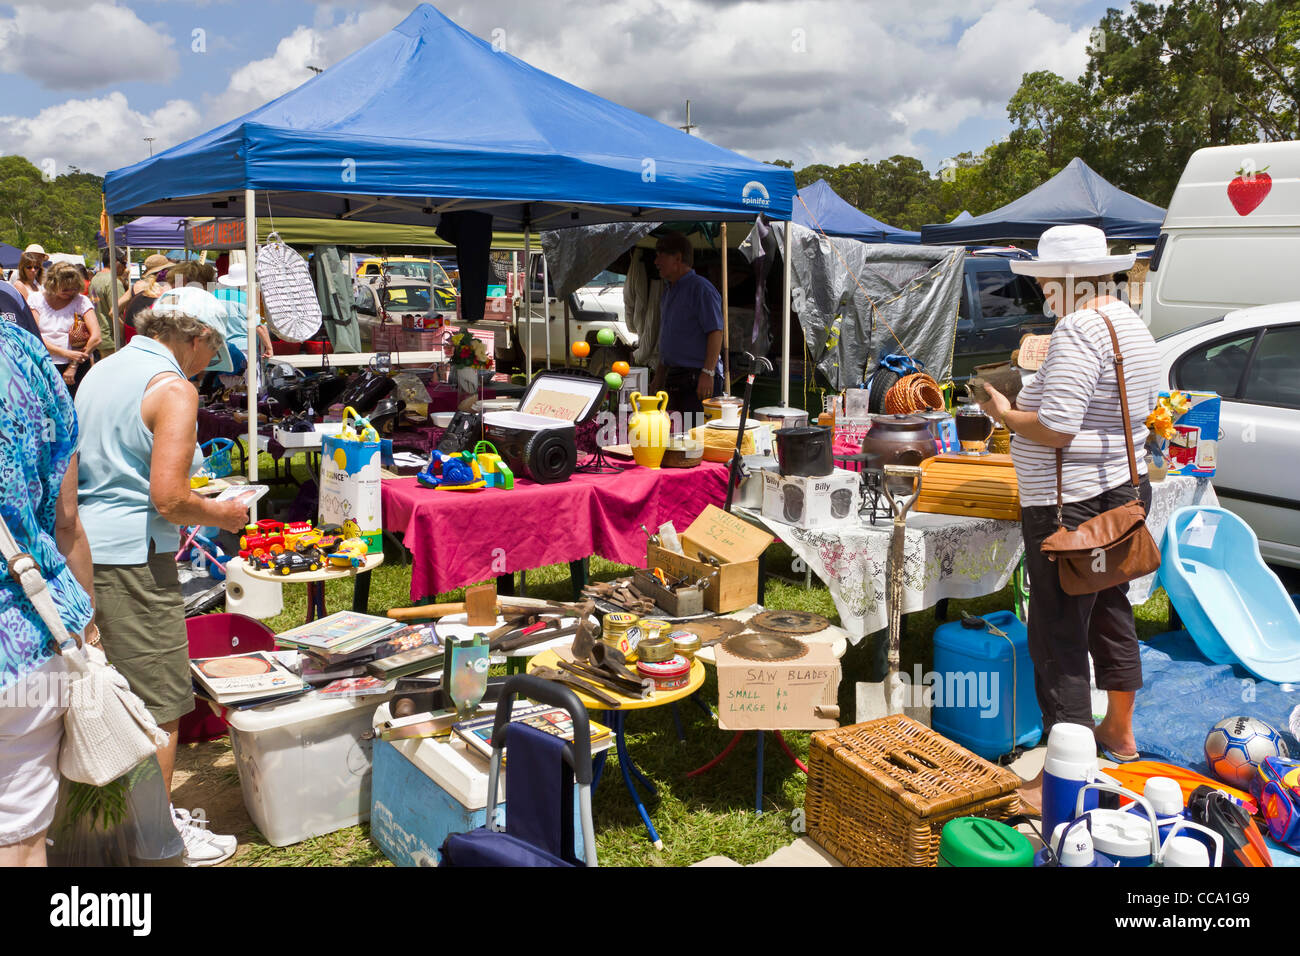 Second hand goods stall at country produce market at Yandina Stock Photo: 42017369 - Alamy